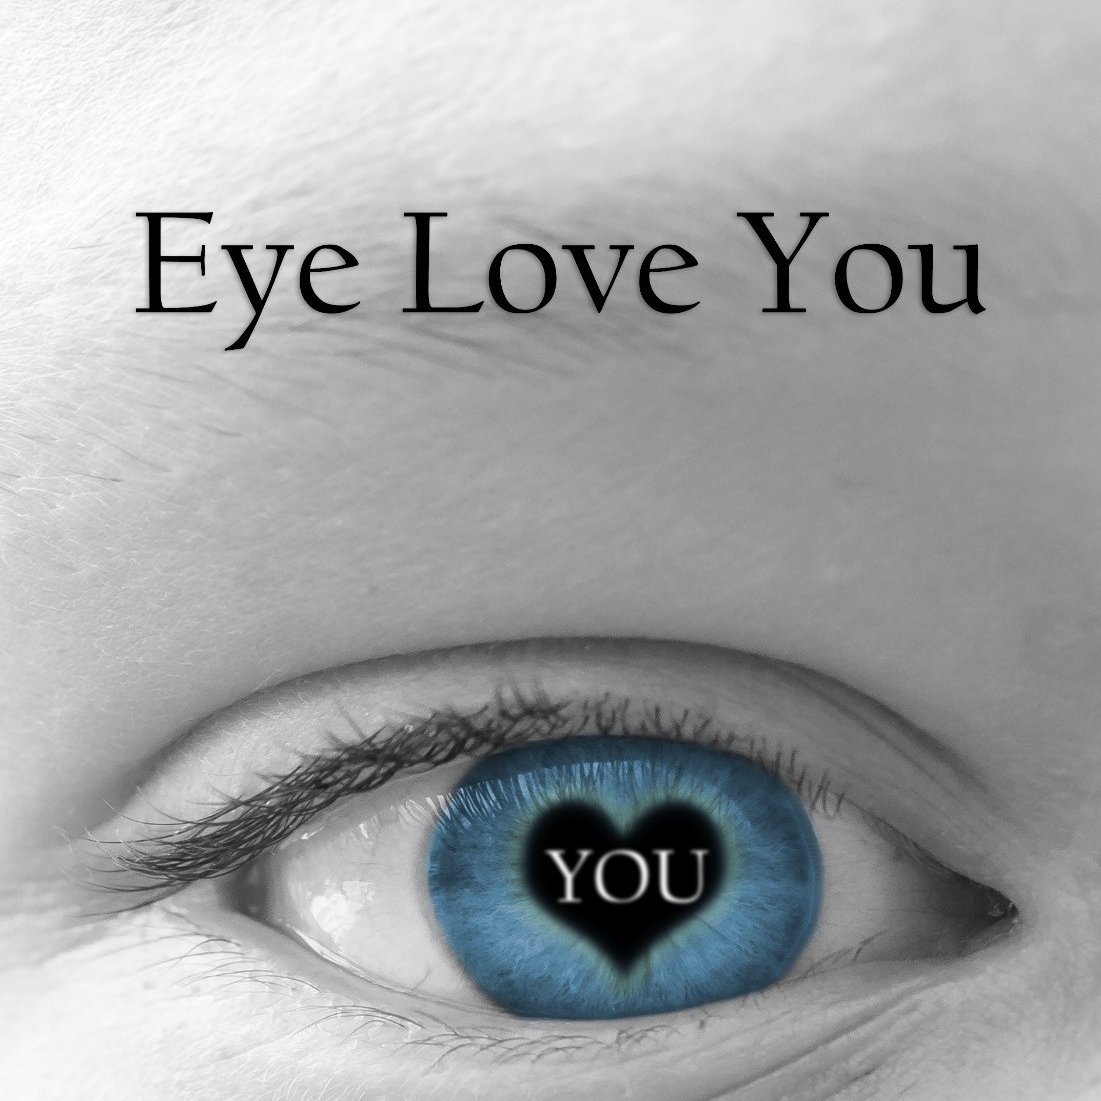 EYE LOVE YOU – a collection of heartfelt poems penned by Charlie Toth.